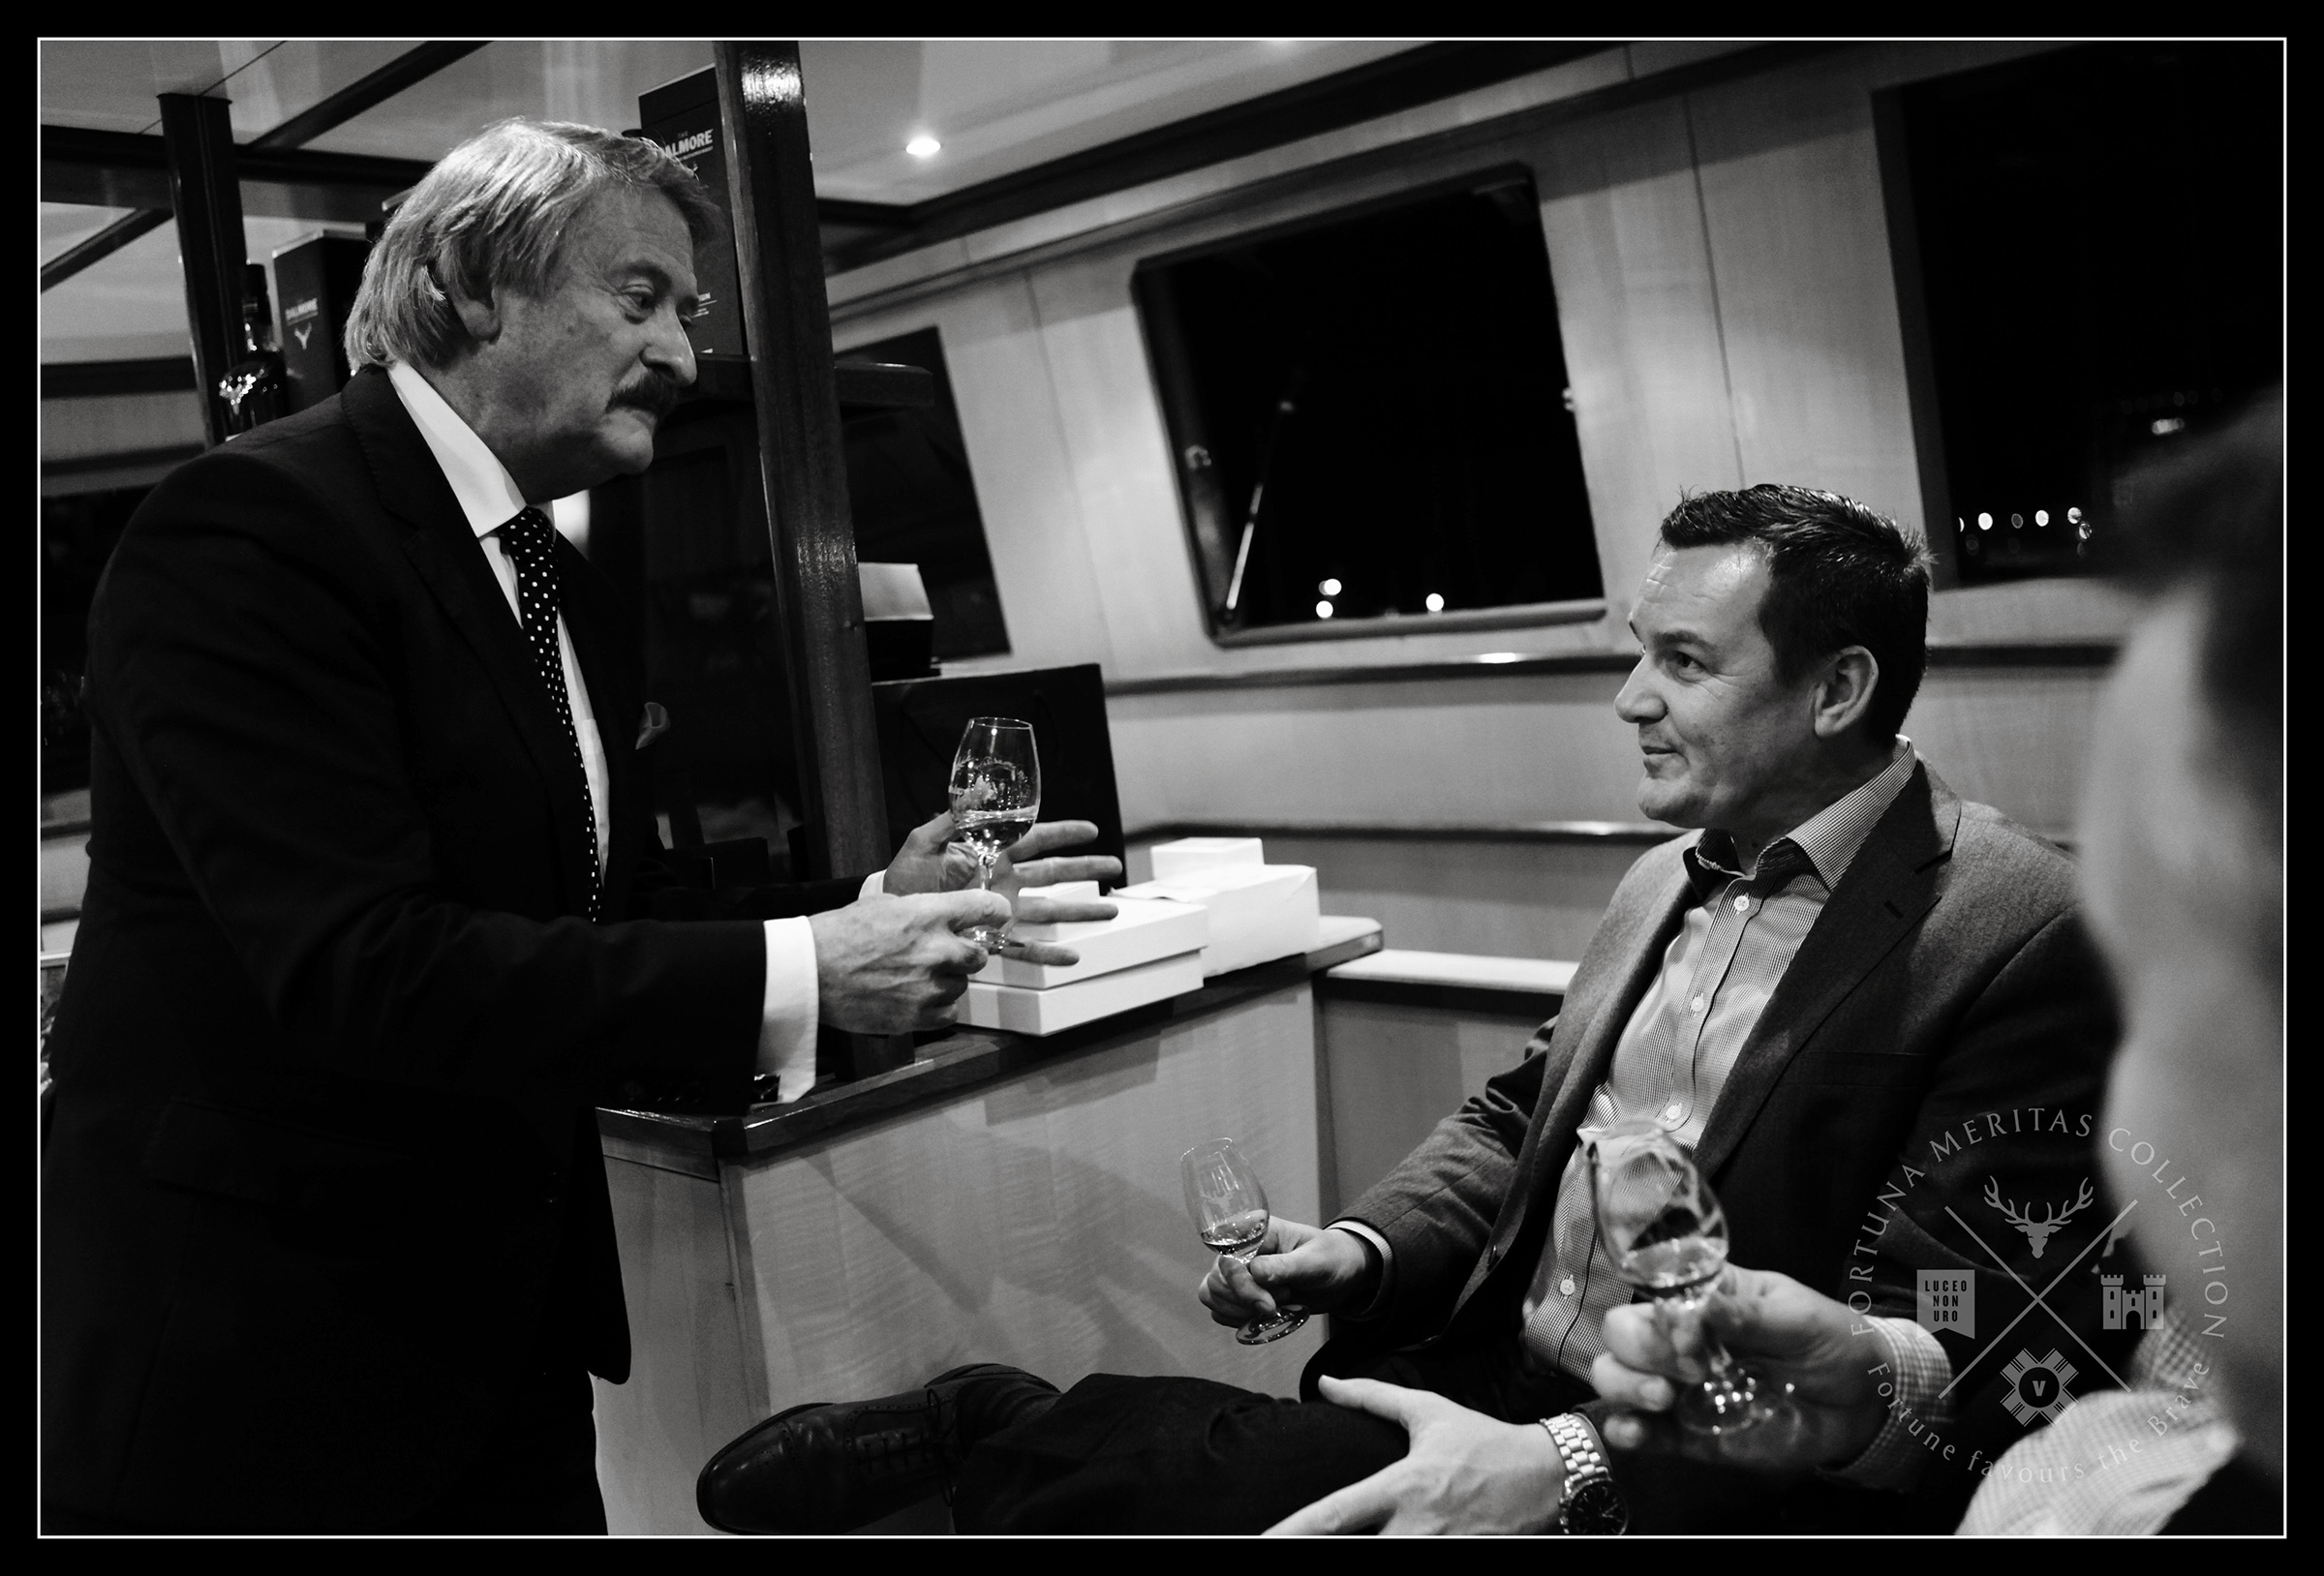 Two men tasting whisky in the saloon of a super yacht